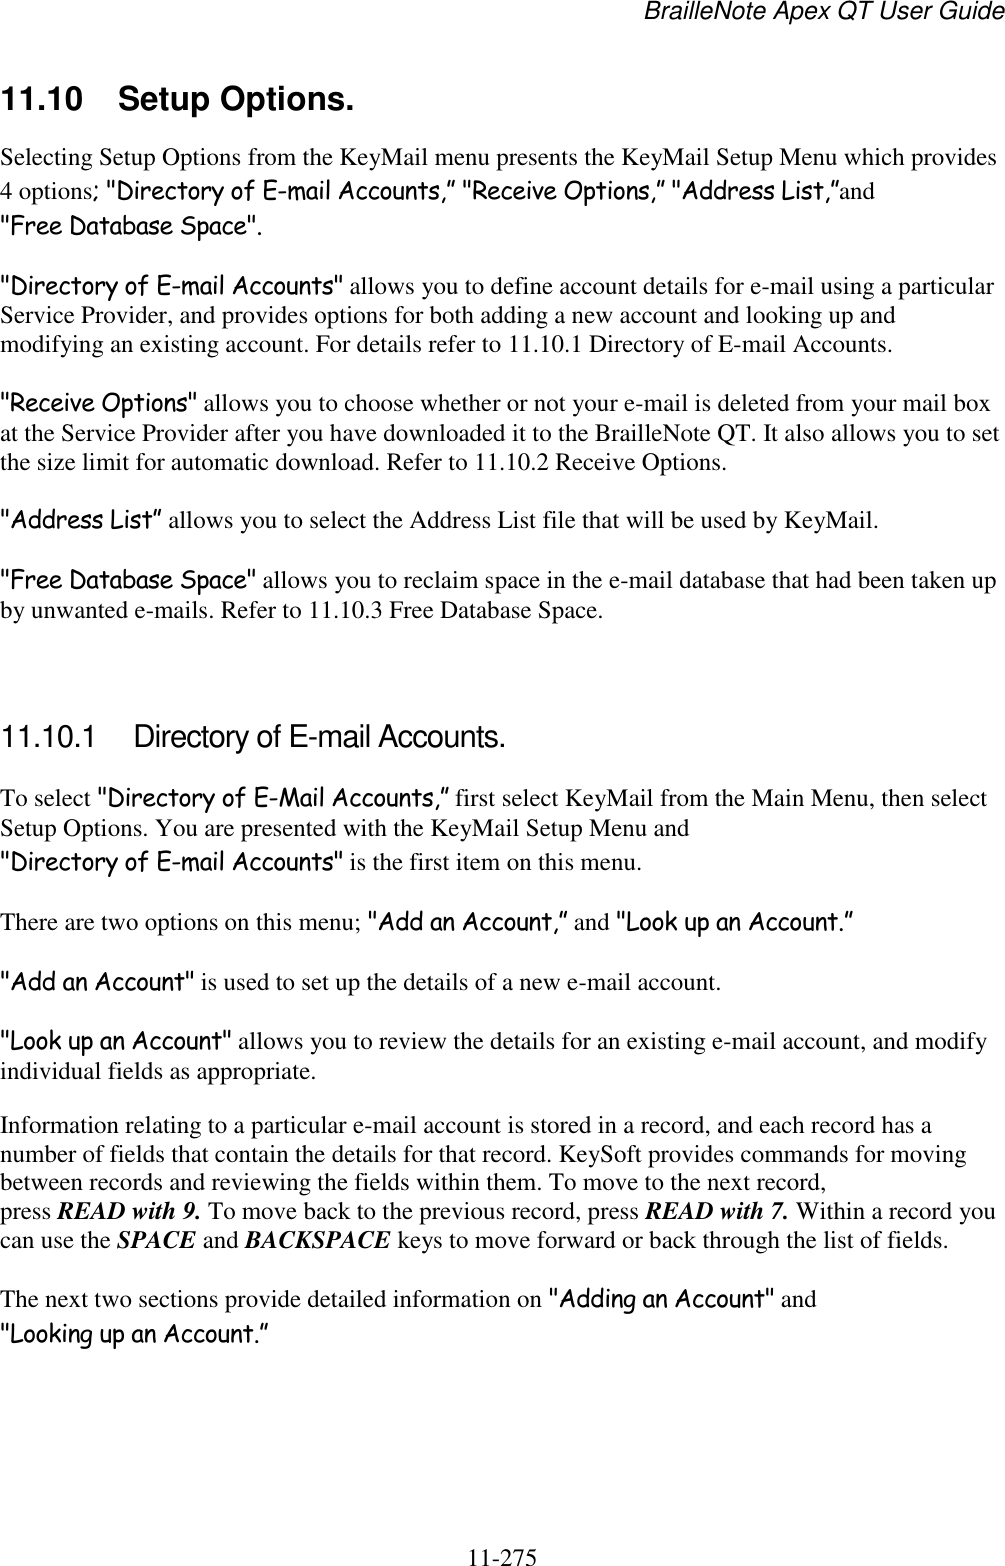 BrailleNote Apex QT User Guide  11-275   11.10  Setup Options. Selecting Setup Options from the KeyMail menu presents the KeyMail Setup Menu which provides 4 options; &quot;Directory of E-mail Accounts,” &quot;Receive Options,” &quot;Address List,”and &quot;Free Database Space&quot;.  &quot;Directory of E-mail Accounts&quot; allows you to define account details for e-mail using a particular Service Provider, and provides options for both adding a new account and looking up and modifying an existing account. For details refer to 11.10.1 Directory of E-mail Accounts. &quot;Receive Options&quot; allows you to choose whether or not your e-mail is deleted from your mail box at the Service Provider after you have downloaded it to the BrailleNote QT. It also allows you to set the size limit for automatic download. Refer to 11.10.2 Receive Options. &quot;Address List” allows you to select the Address List file that will be used by KeyMail. &quot;Free Database Space&quot; allows you to reclaim space in the e-mail database that had been taken up by unwanted e-mails. Refer to 11.10.3 Free Database Space.   11.10.1  Directory of E-mail Accounts. To select &quot;Directory of E-Mail Accounts,” first select KeyMail from the Main Menu, then select Setup Options. You are presented with the KeyMail Setup Menu and &quot;Directory of E-mail Accounts&quot; is the first item on this menu. There are two options on this menu; &quot;Add an Account,” and &quot;Look up an Account.” &quot;Add an Account&quot; is used to set up the details of a new e-mail account. &quot;Look up an Account&quot; allows you to review the details for an existing e-mail account, and modify individual fields as appropriate. Information relating to a particular e-mail account is stored in a record, and each record has a number of fields that contain the details for that record. KeySoft provides commands for moving between records and reviewing the fields within them. To move to the next record, press READ with 9. To move back to the previous record, press READ with 7. Within a record you can use the SPACE and BACKSPACE keys to move forward or back through the list of fields. The next two sections provide detailed information on &quot;Adding an Account&quot; and &quot;Looking up an Account.”   